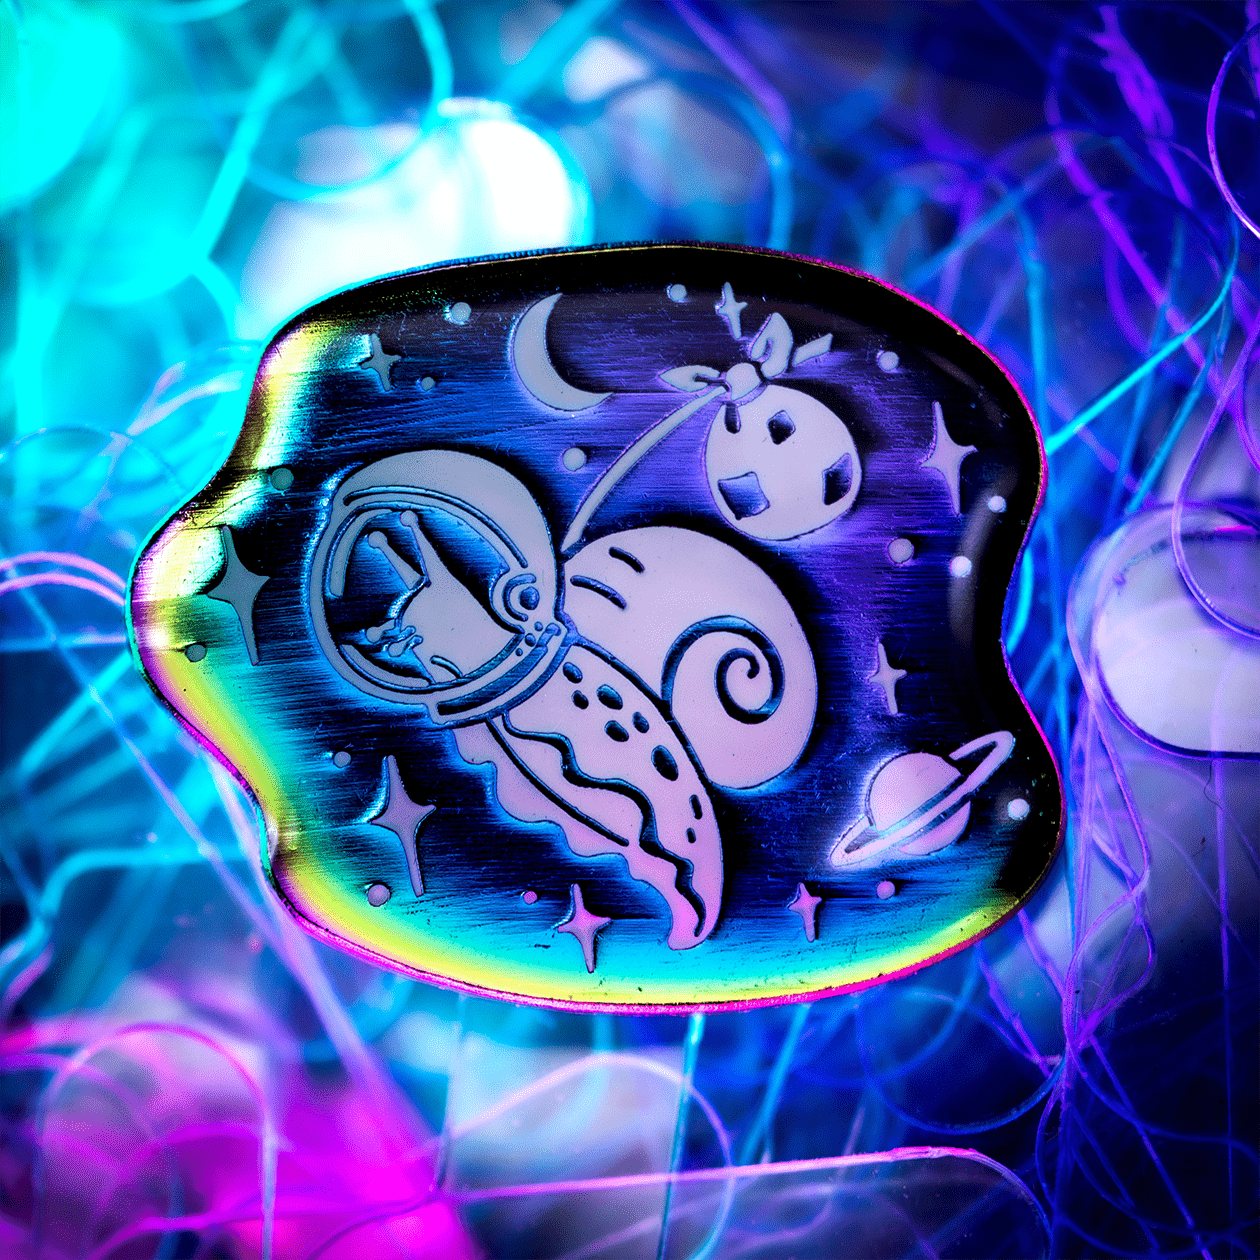 The Roving House rainbow metal enamel pin, featuring an astronaut traveling snail and his bindle or hobo stick, floating in space